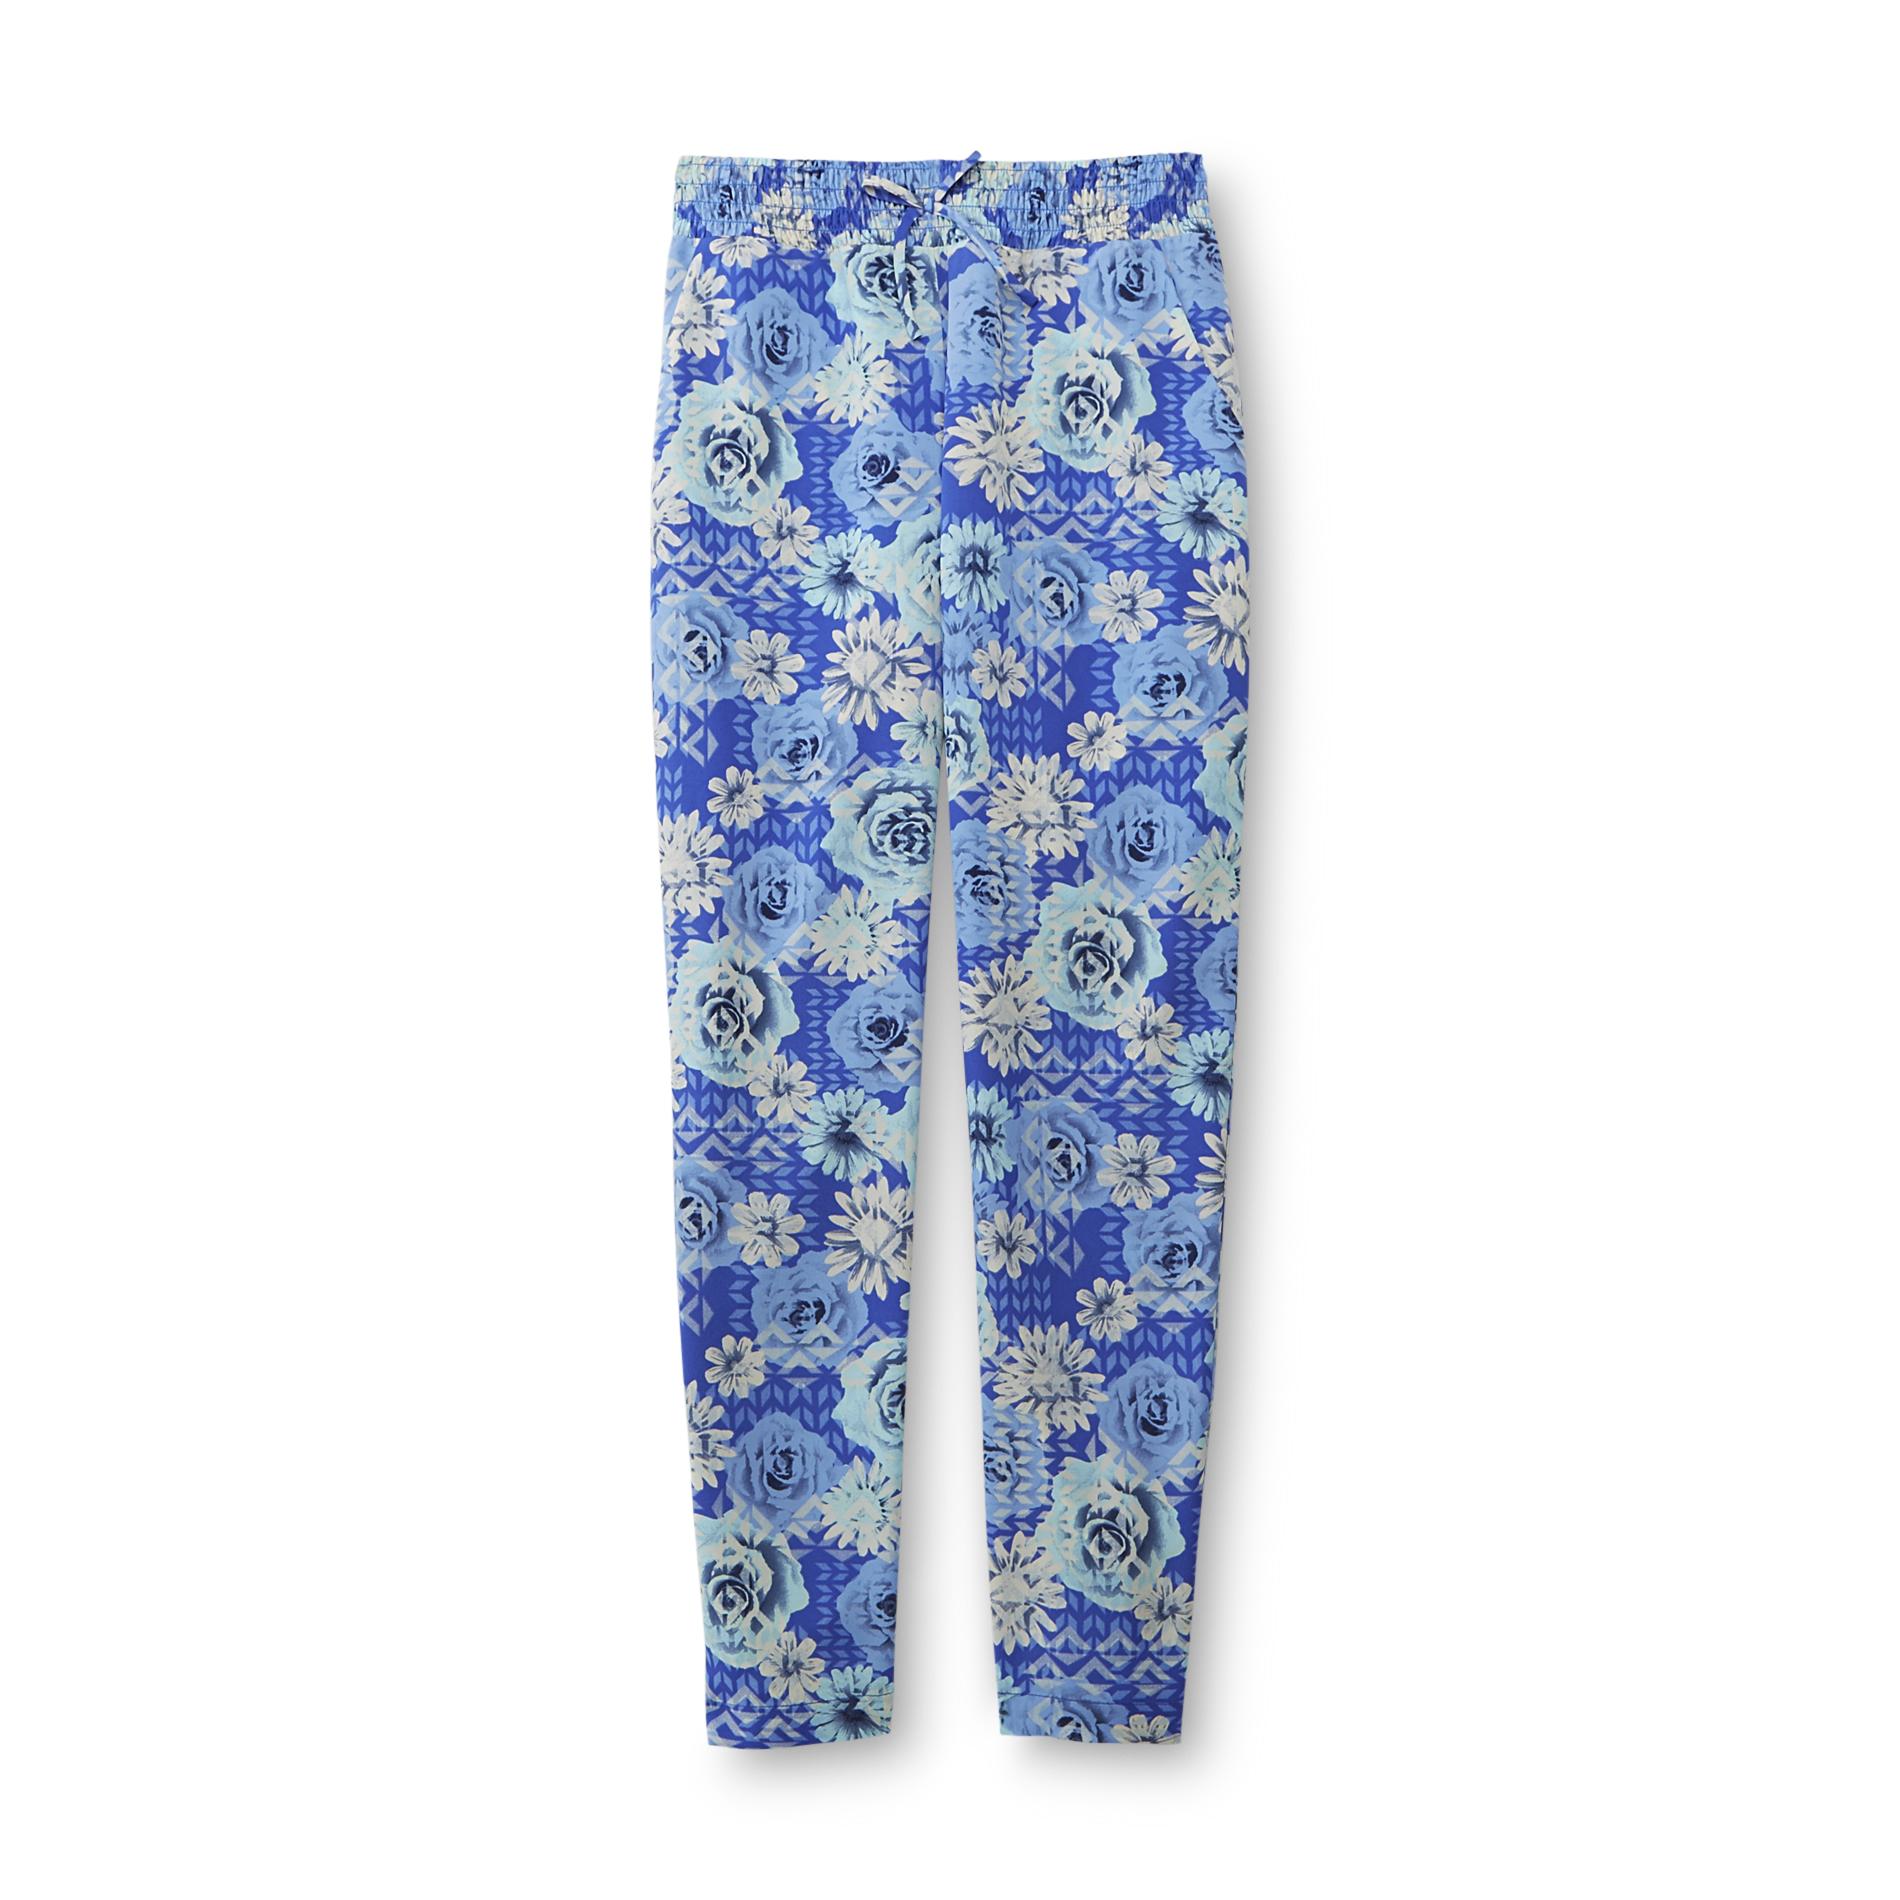 Route 66 Girl's Beach Pants - Floral Print